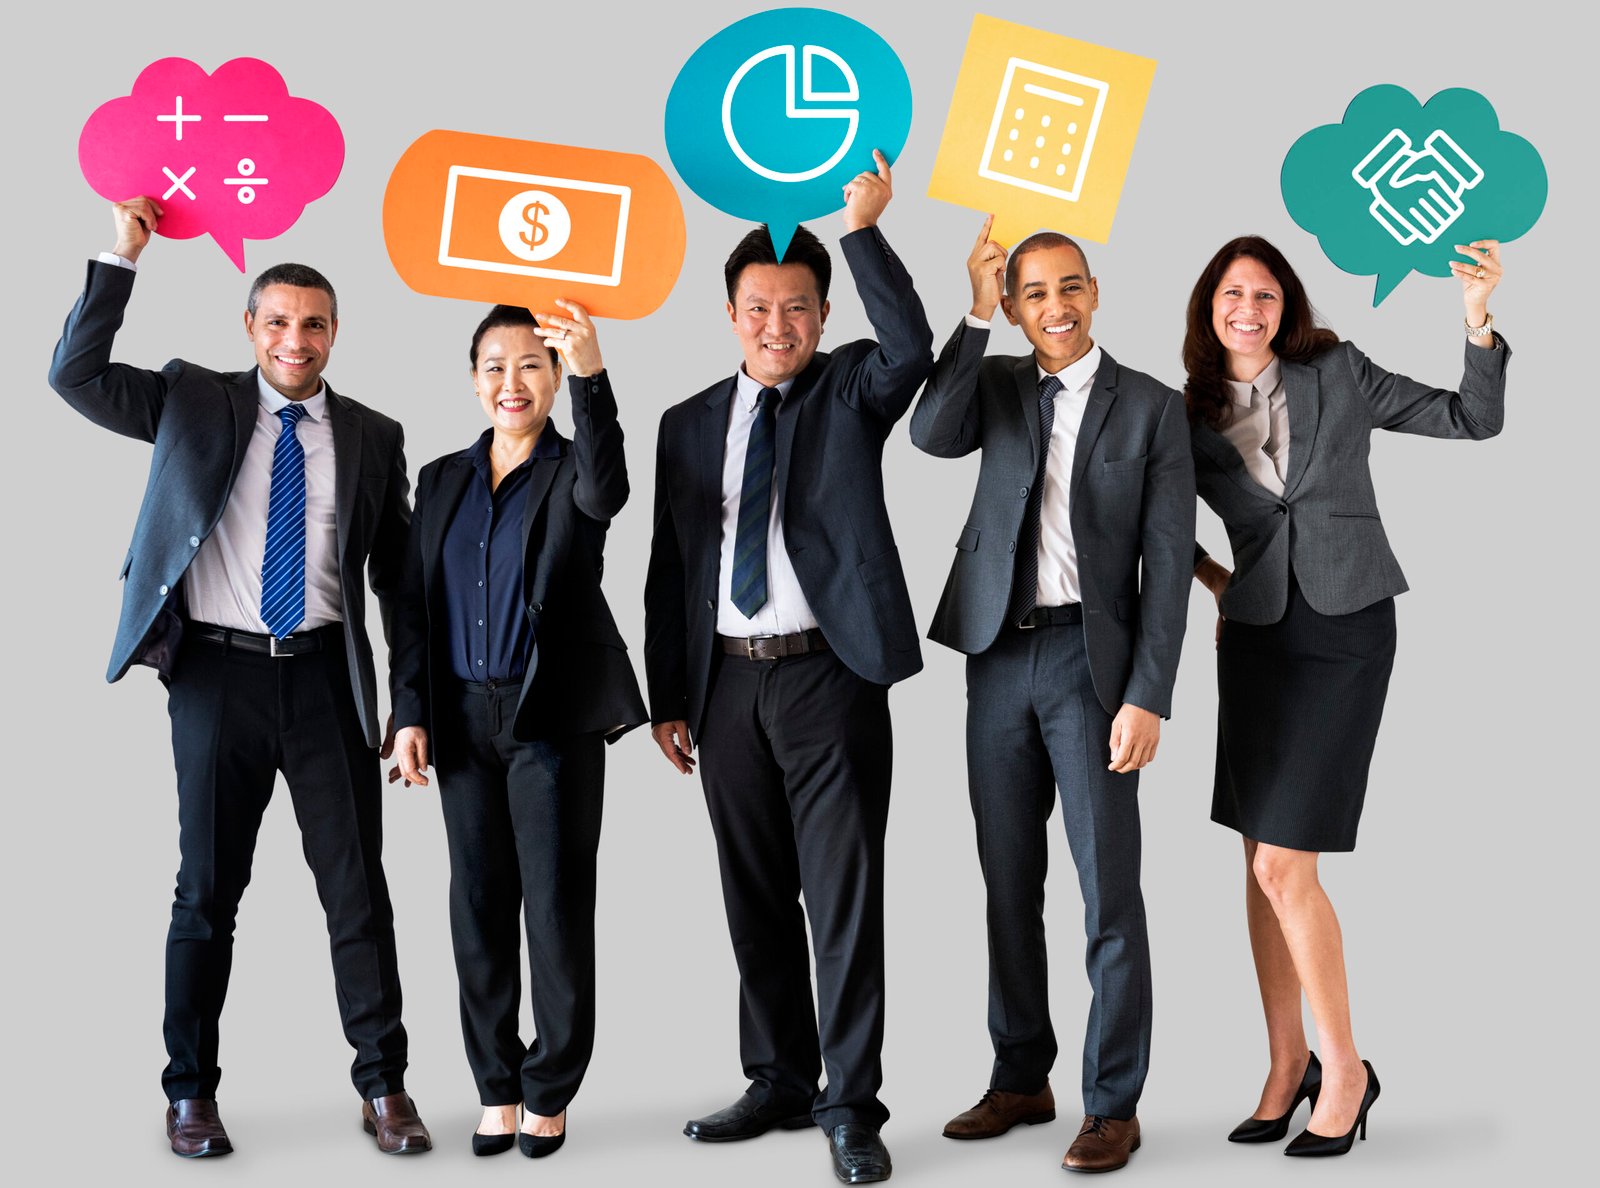 Cheerful business people holding speech bubble icon